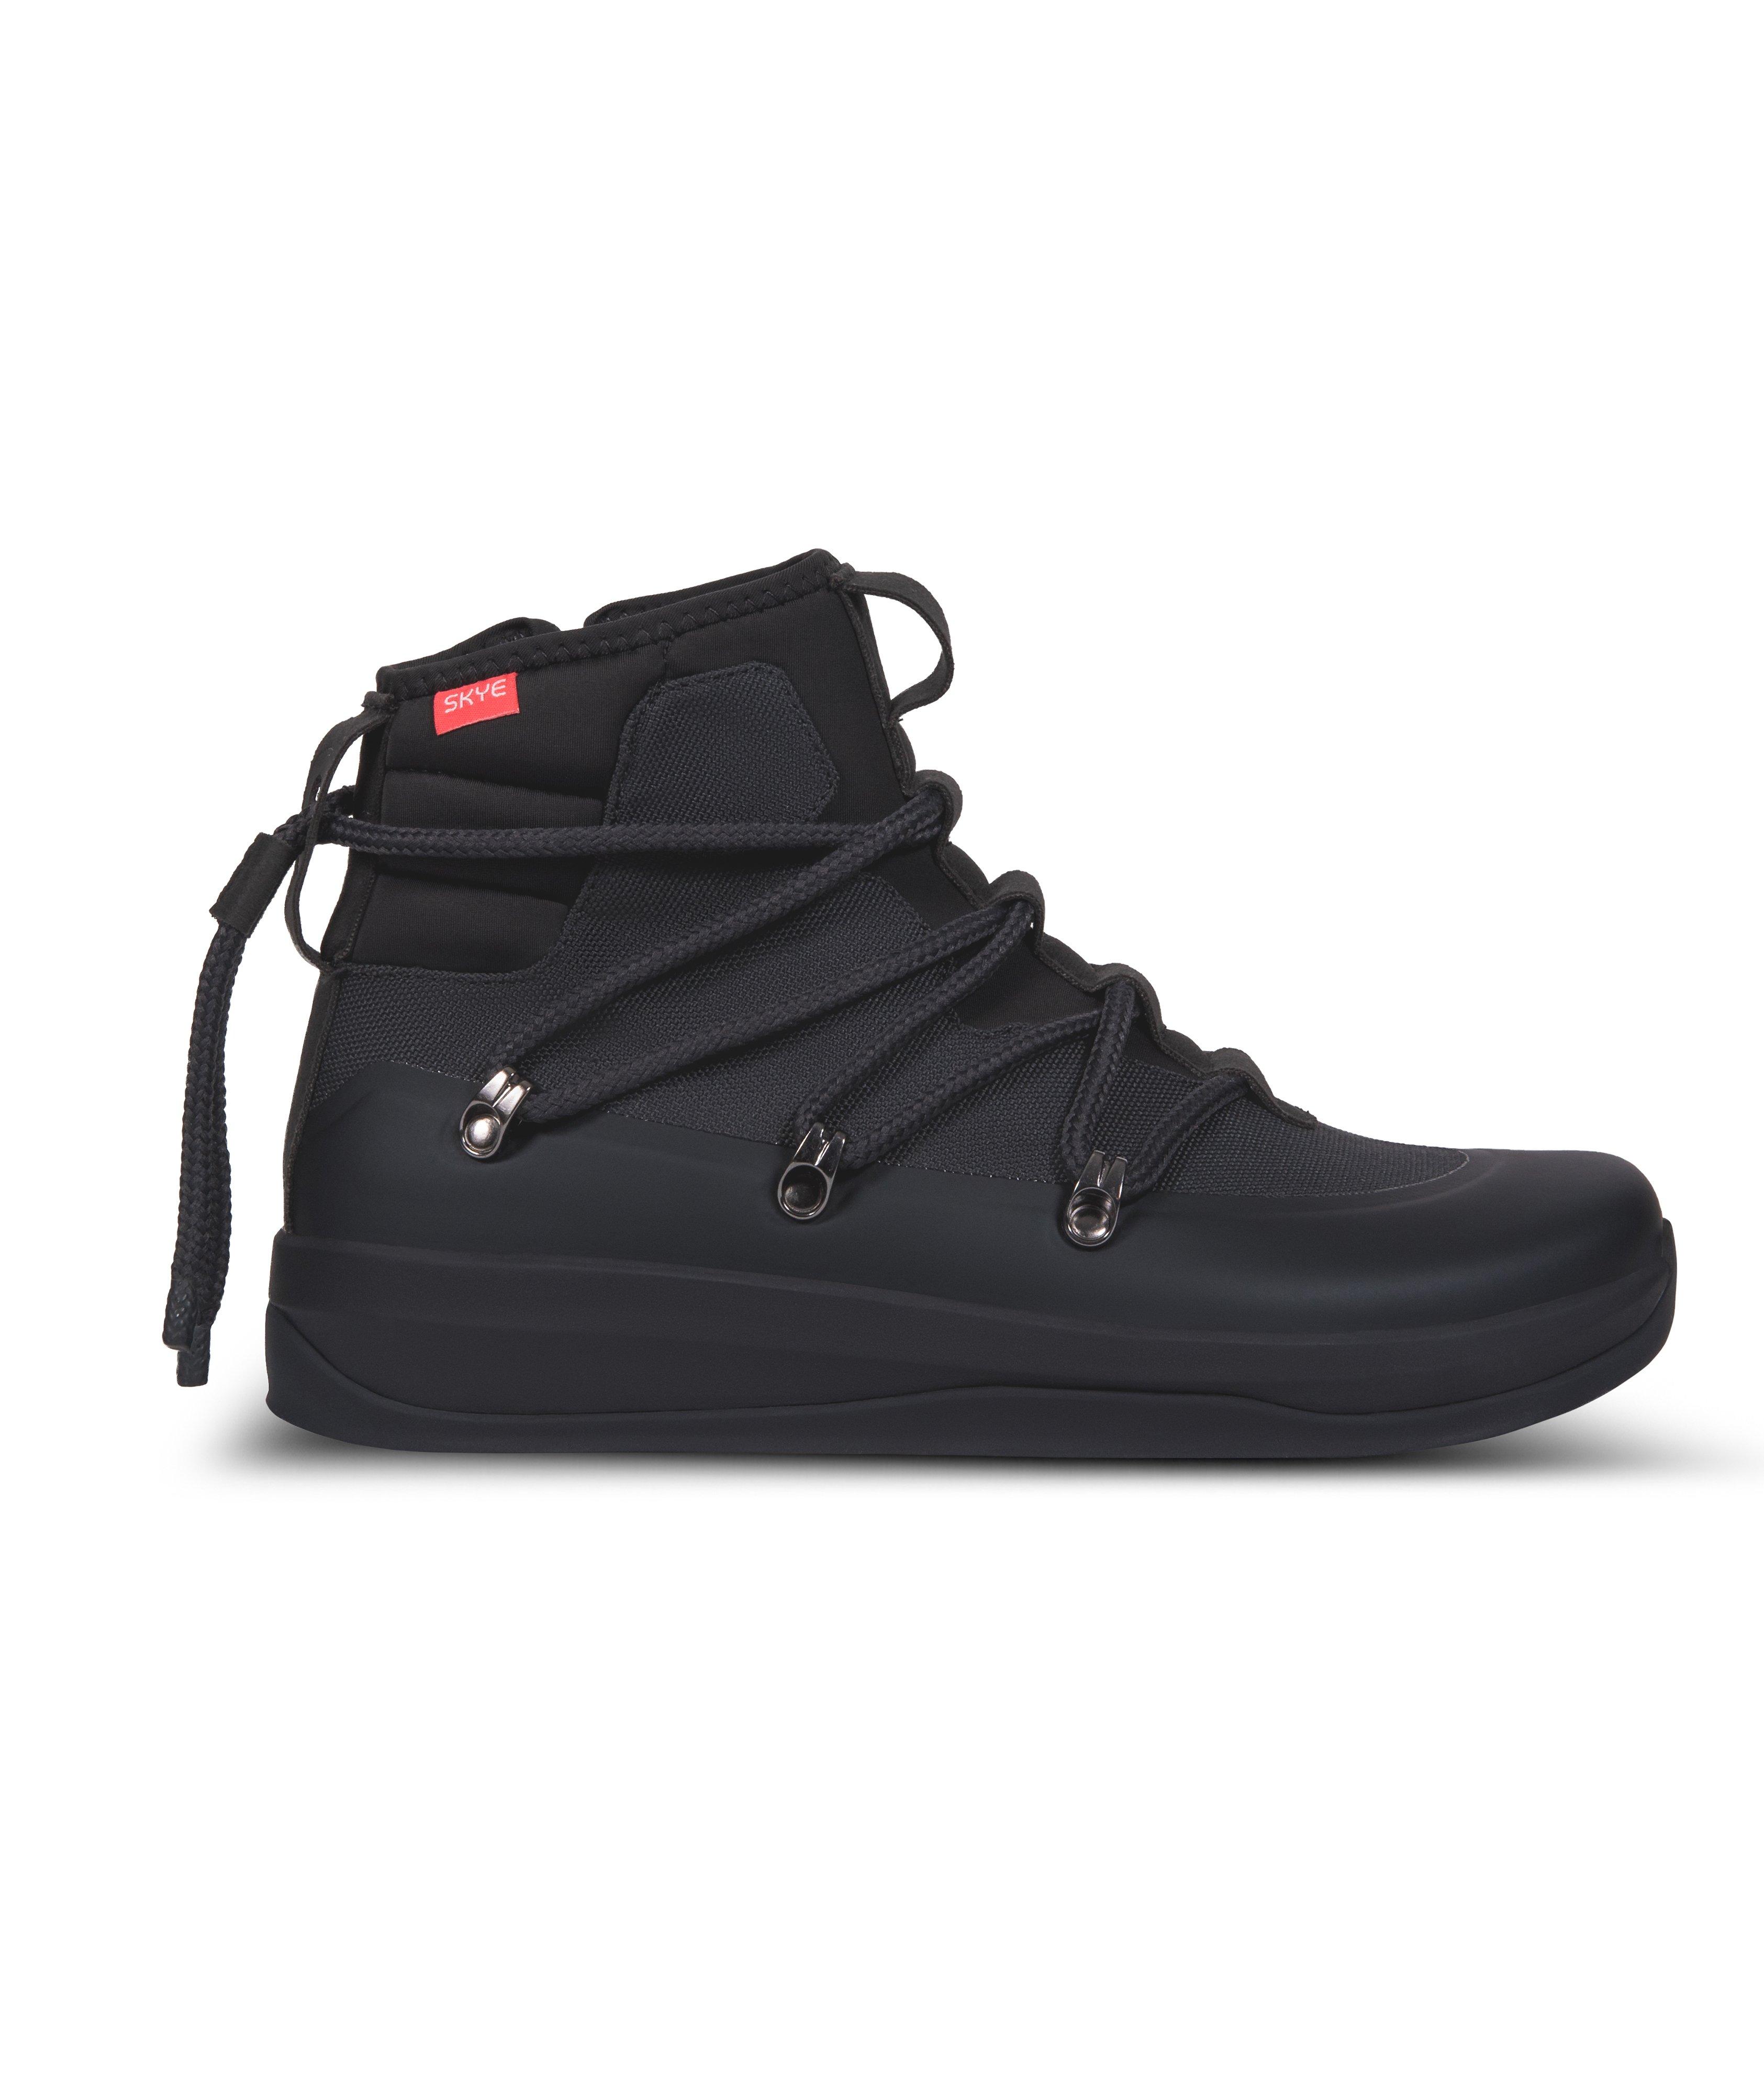 The Stnley High-Top Sneaker Boots image 0